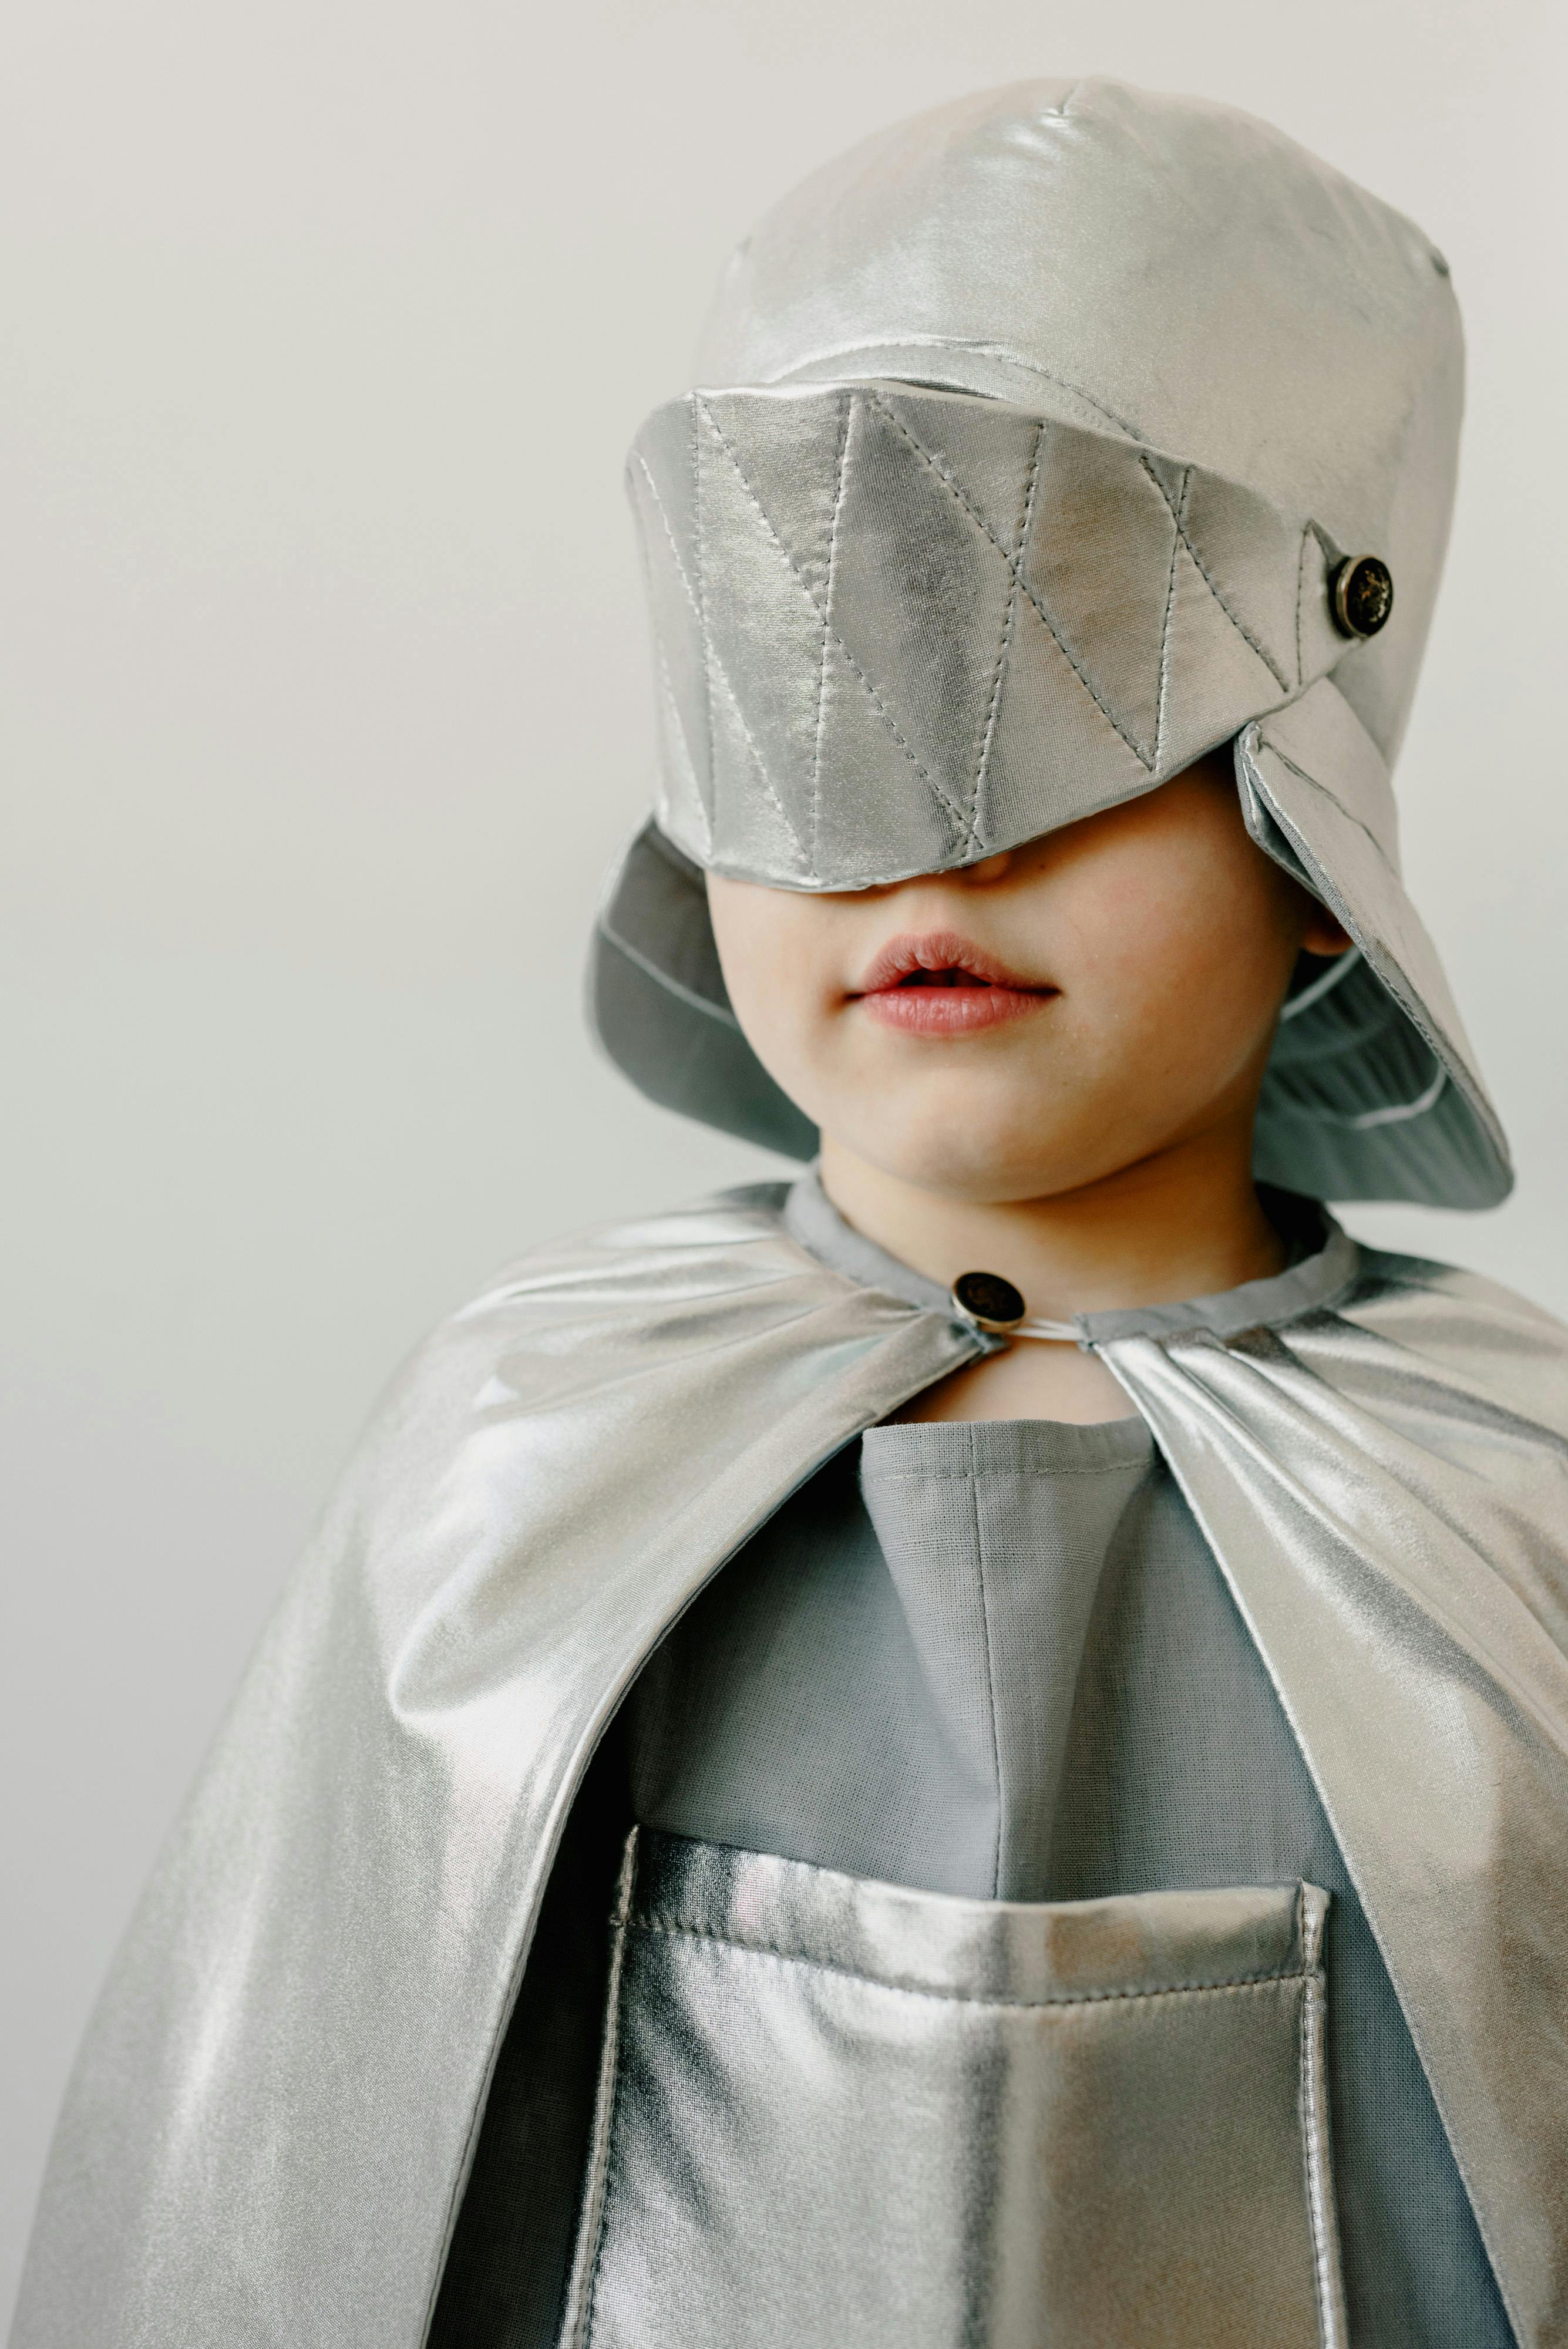 child wearing a silver costume